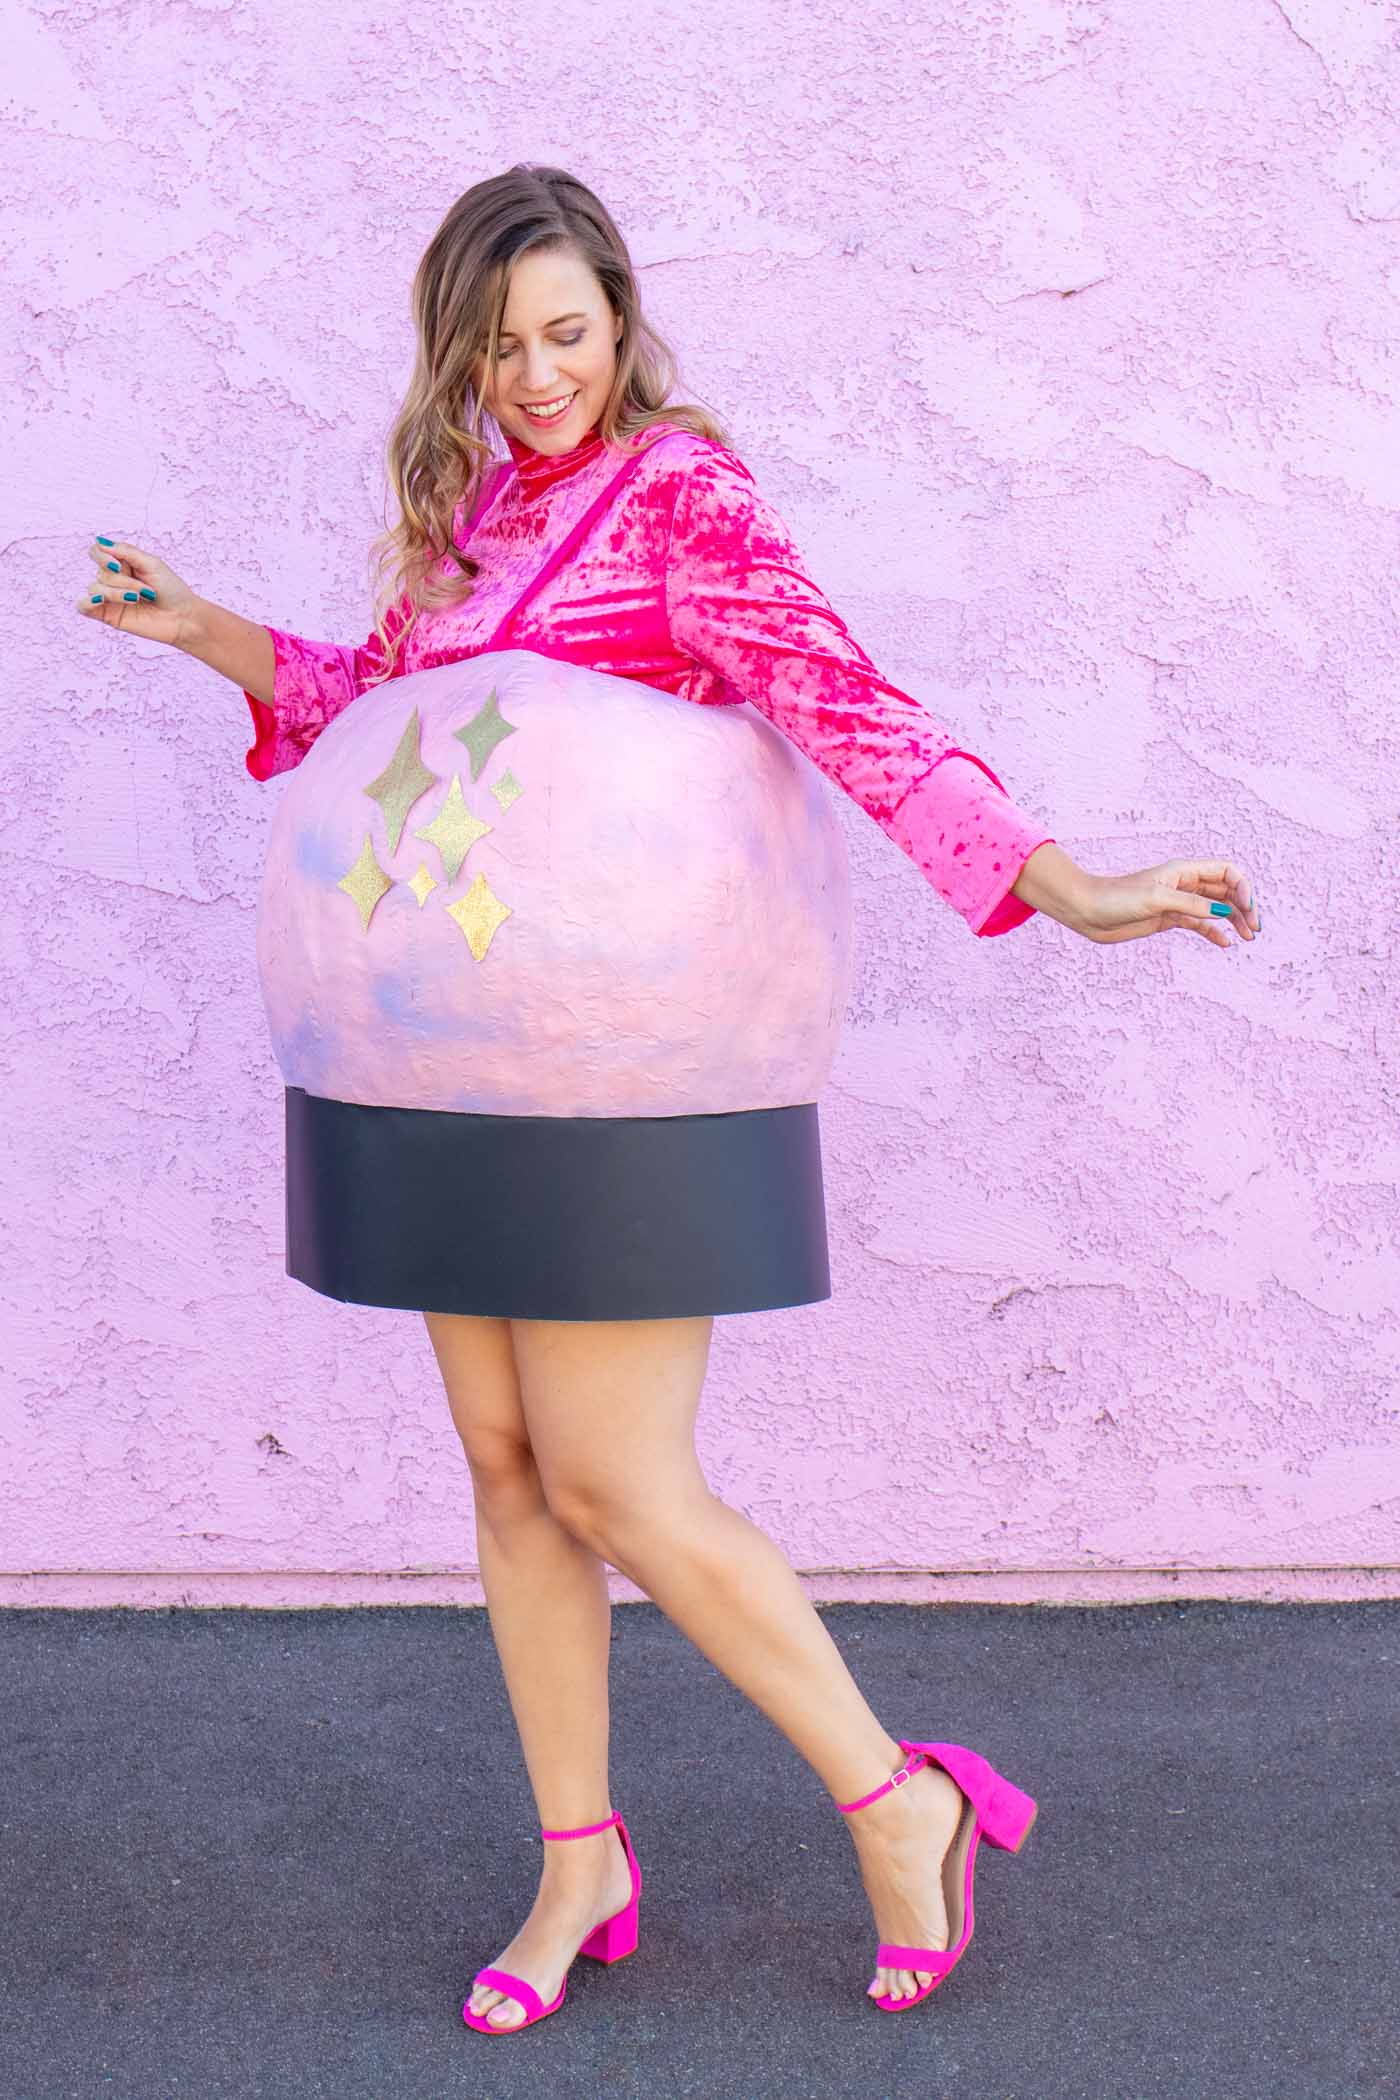 DIY Crystal Ball Costume for Halloween // Use paper mache on a large balloon to create a DIY halloween costume that looks like a mystical crystal ball used by a fortune teller! #crystalball #papermache #halloween #costume #kidscostume #adultcostume